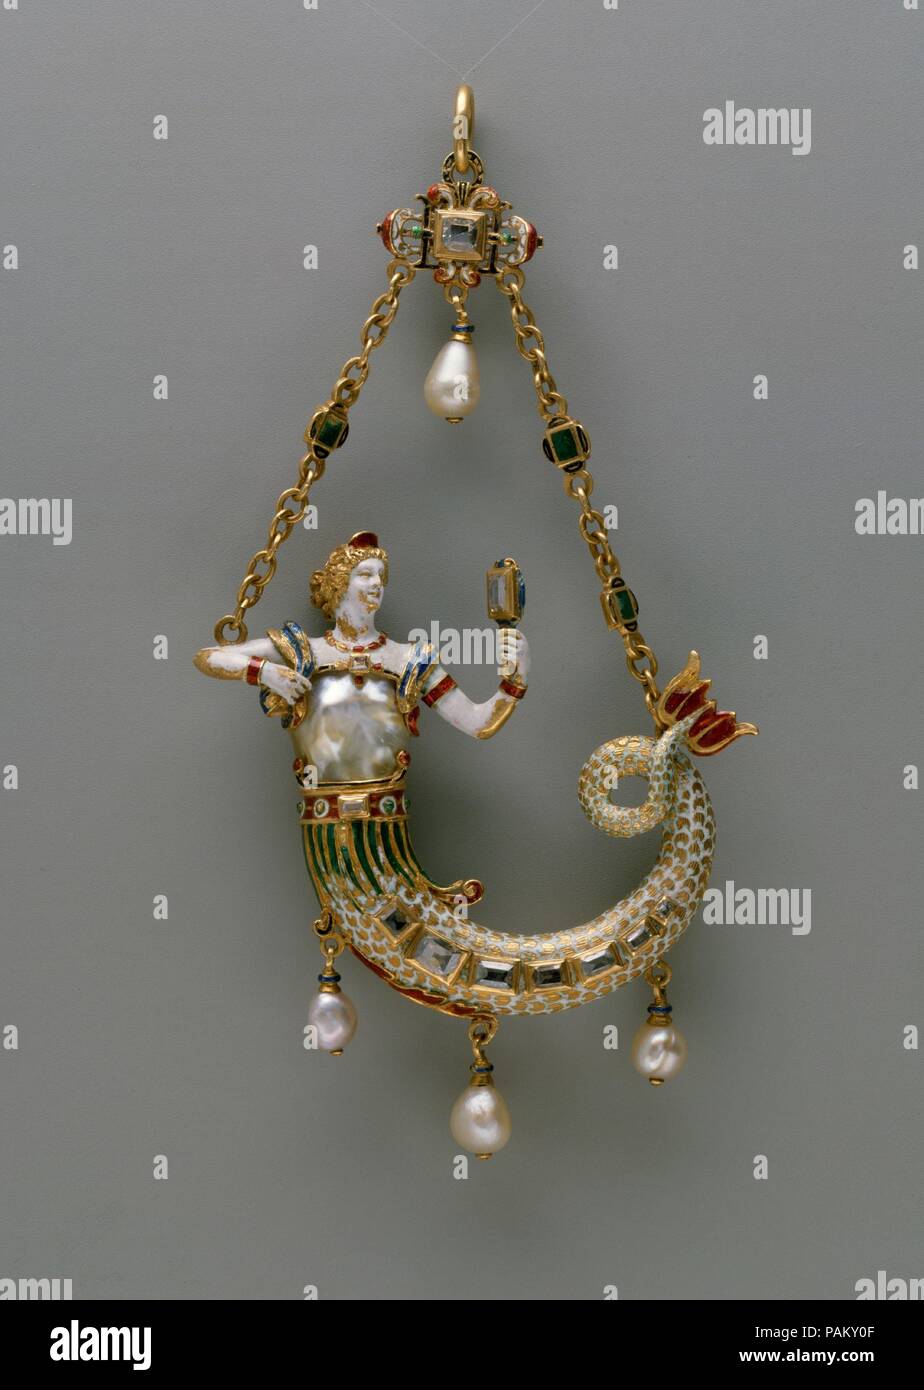 Pendant in the form of a mermaid. Culture: German or French. Designer: Probably based on a design by Reinhold Vasters (German, Erkelenz 1827-1909 Aachen). Dimensions: Height: 4 7/8 in. (12.4 cm). Date: ca. 1870-95.  A number of details of the design of this jewel--including the long, attenuated fish tail, the wispy, featherlike skirt, the stole draped from the shoulders, and the hair styled in a low chignon worn with a tiara--are present in two unpublished designs for a mermaid jewel by the Aachen goldsmith Reinhold Vasters that are now in the Victoria and Albert Museum, London. The techniques Stock Photo